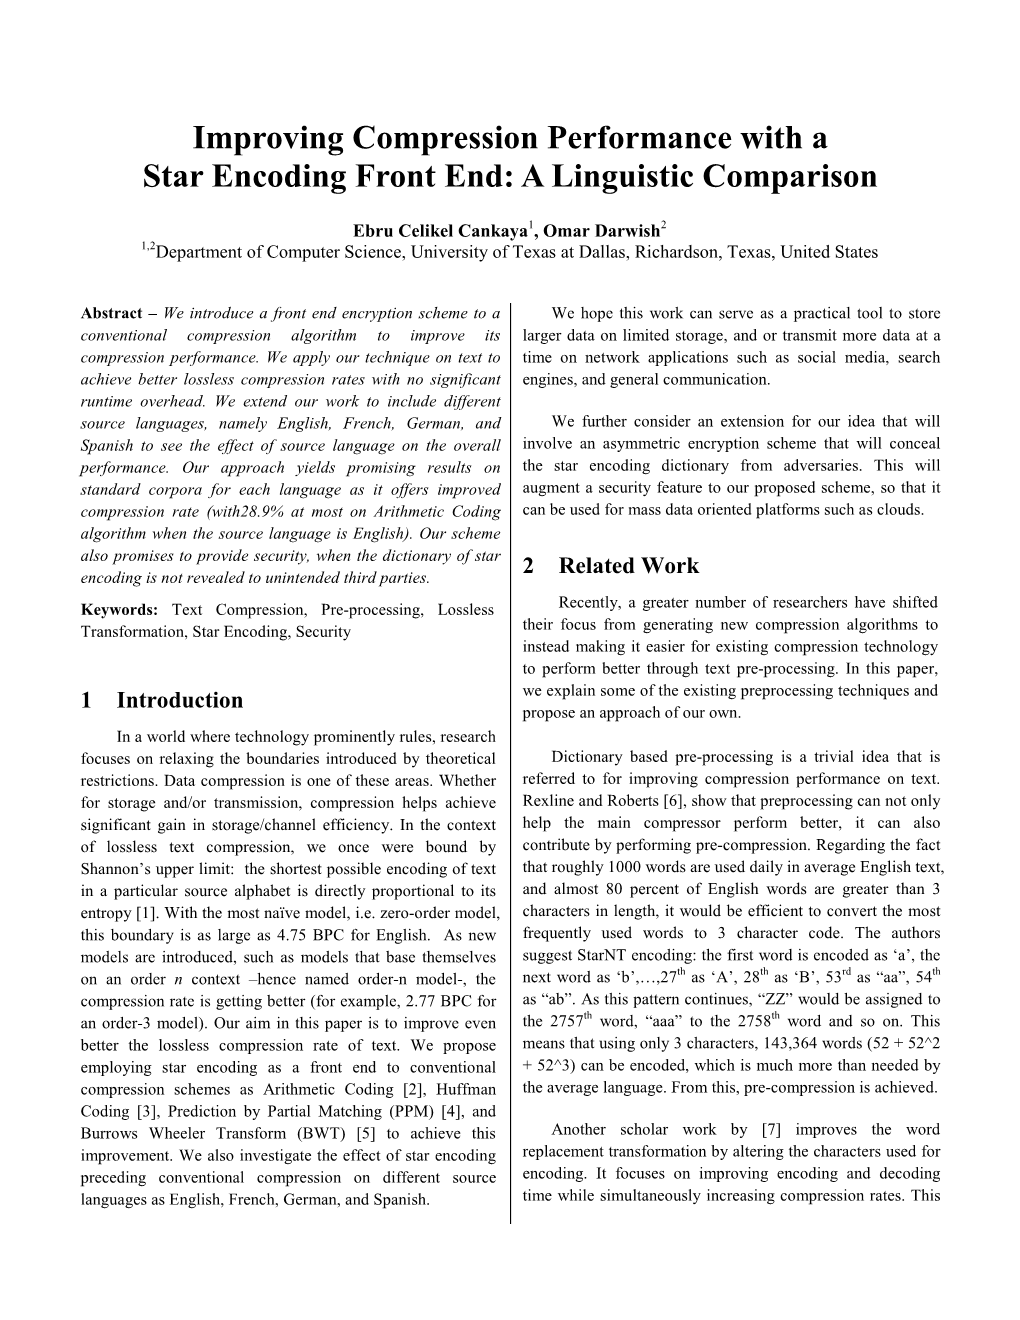 Improving Compression Performance with a Star Encoding Front End: a Linguistic Comparison